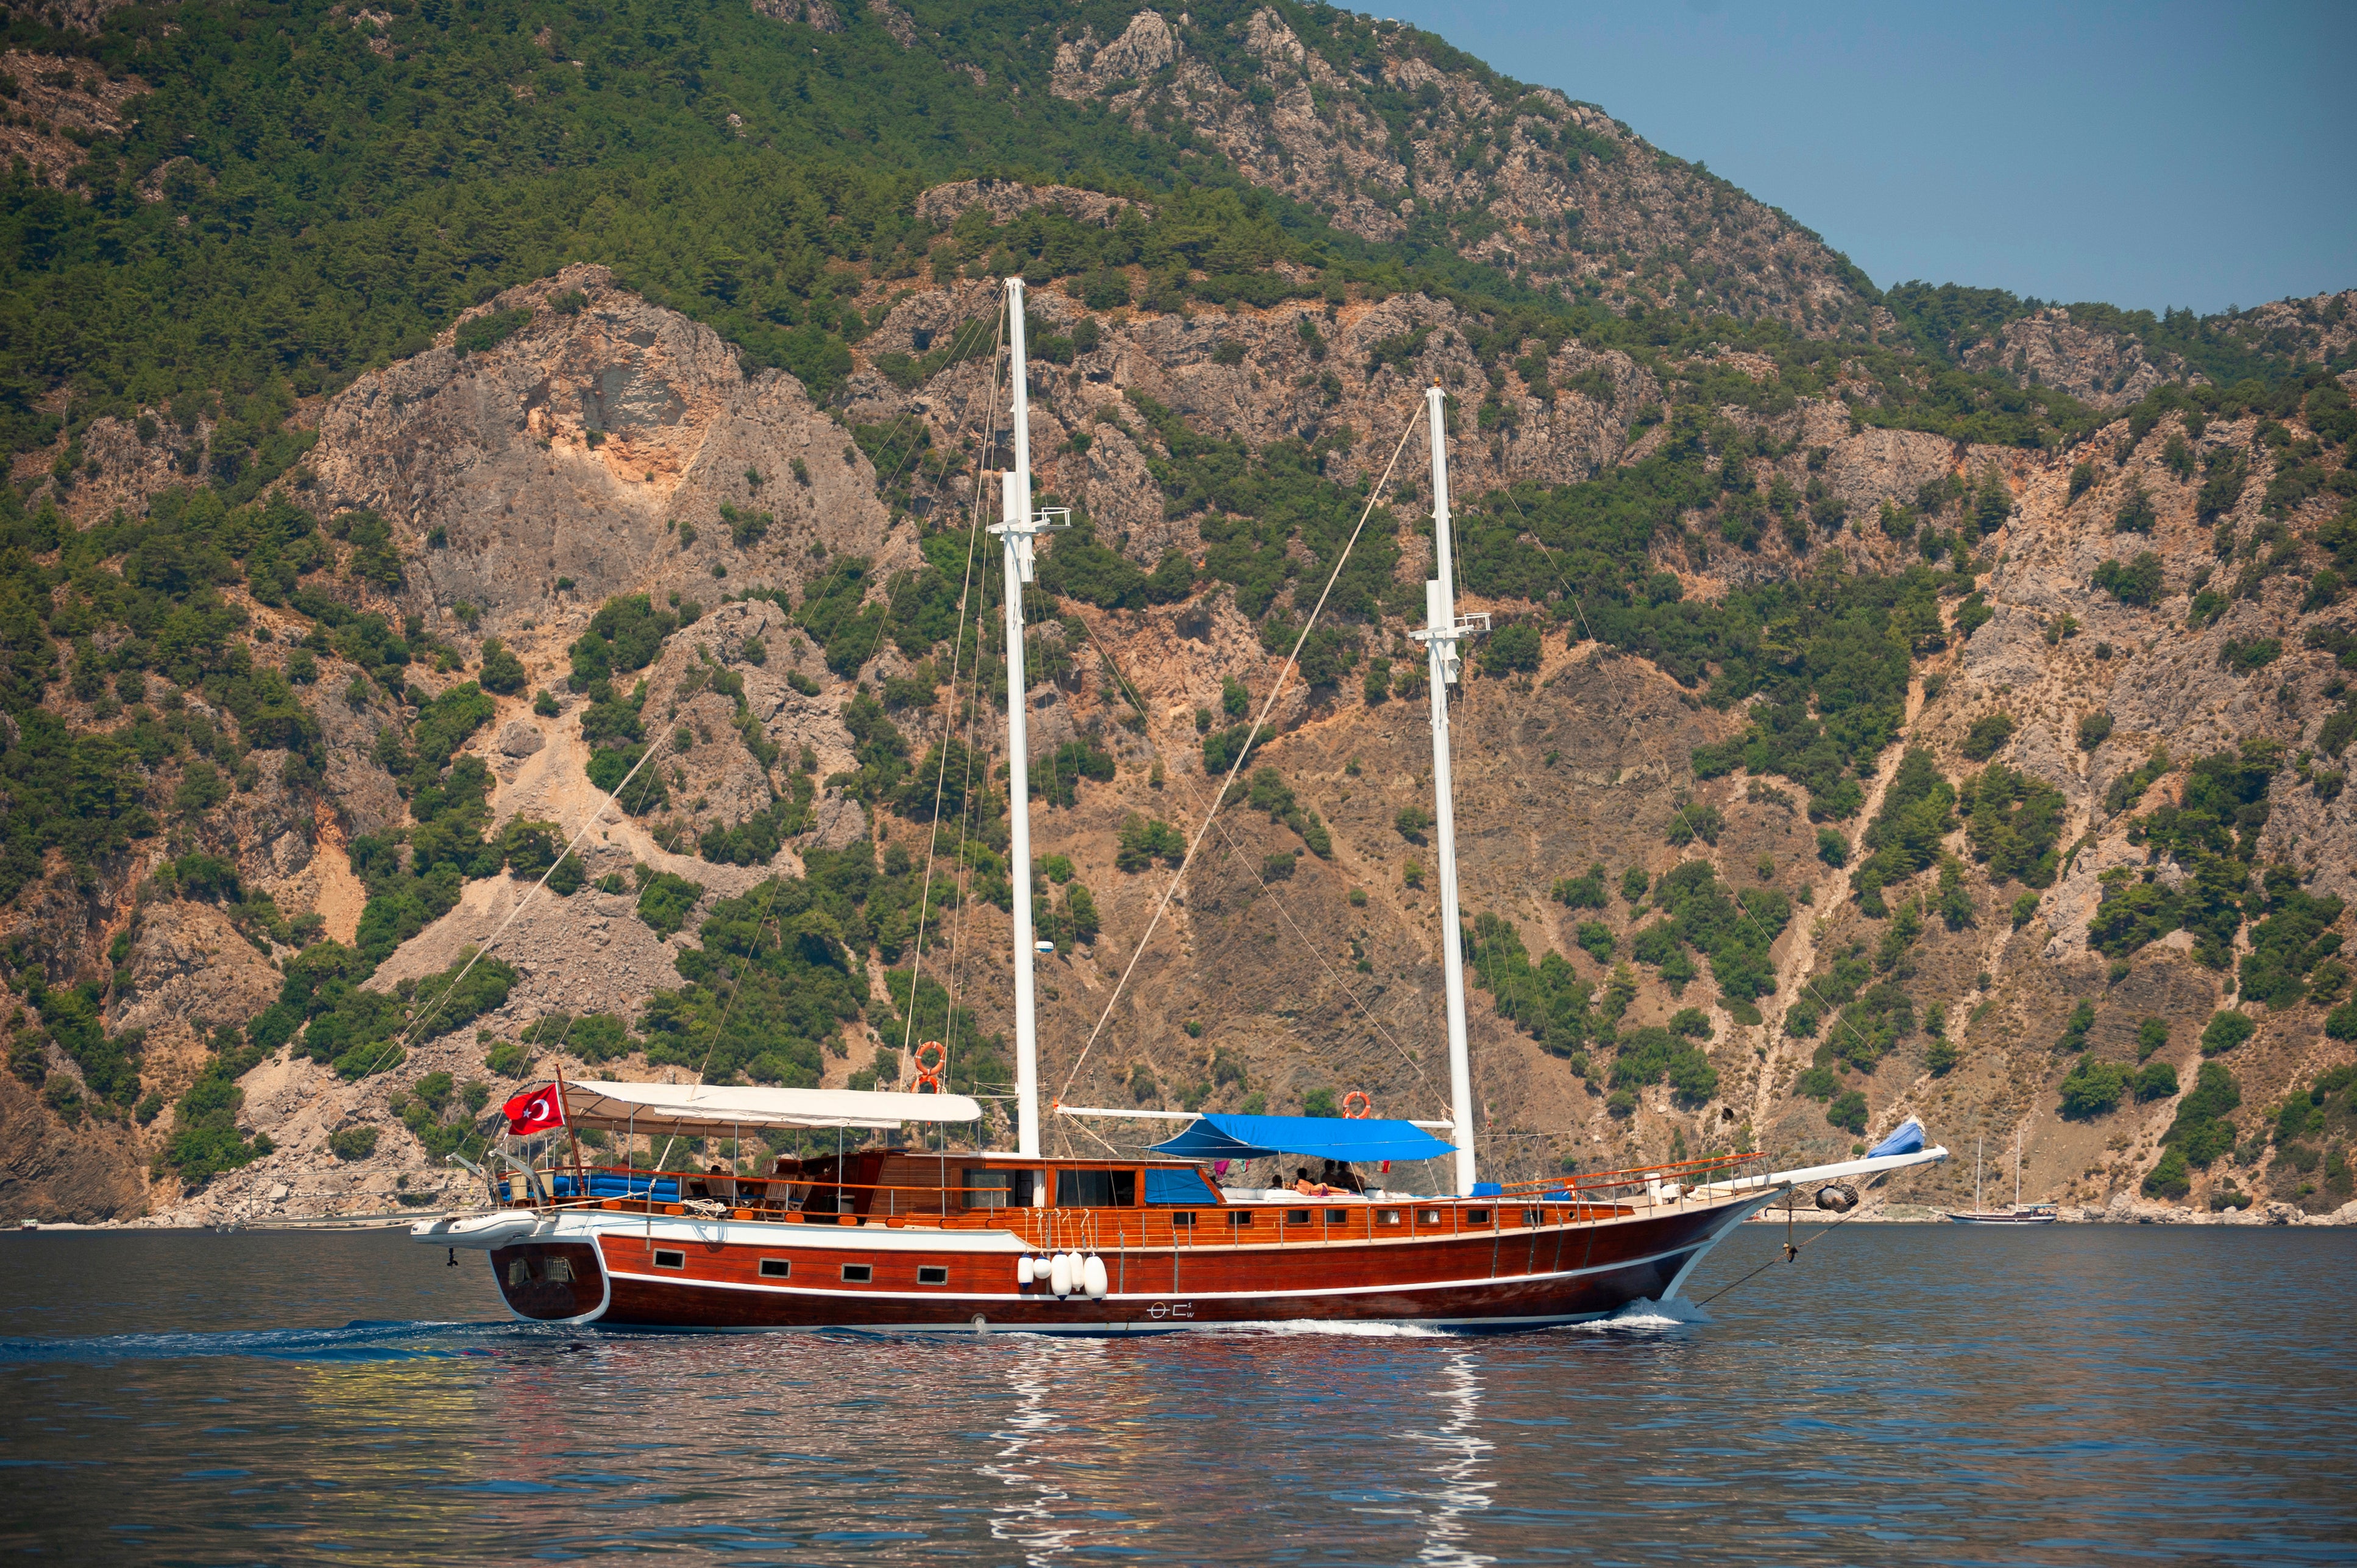 Set sail on a gület for a sailor’s view of the Turkish coastline